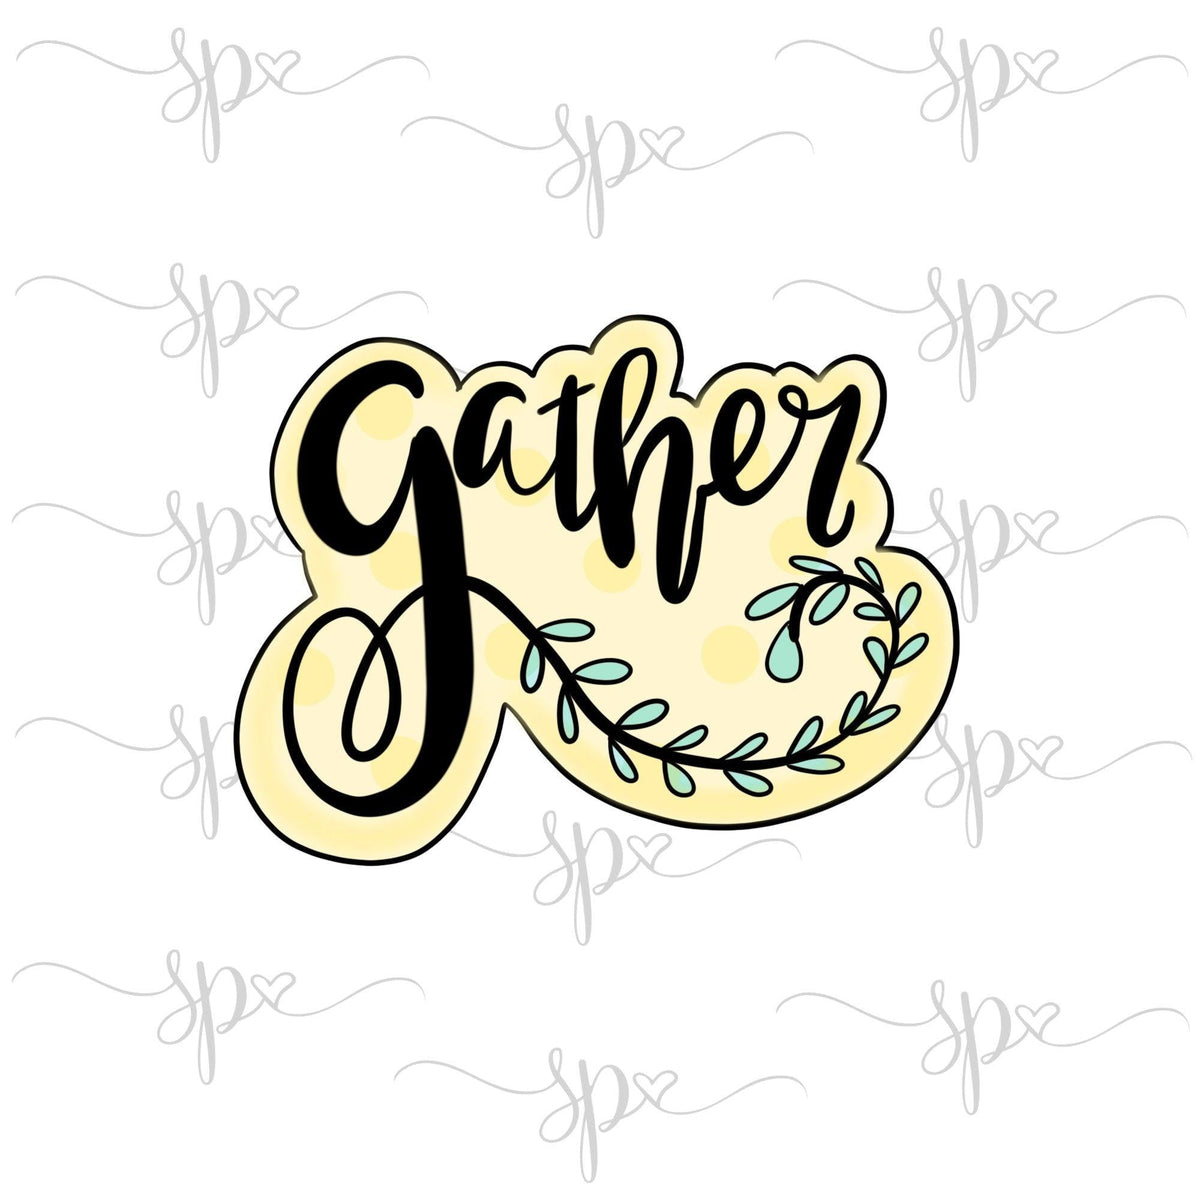 Gather Hand Lettered Cookie Cutter - Sweetleigh 